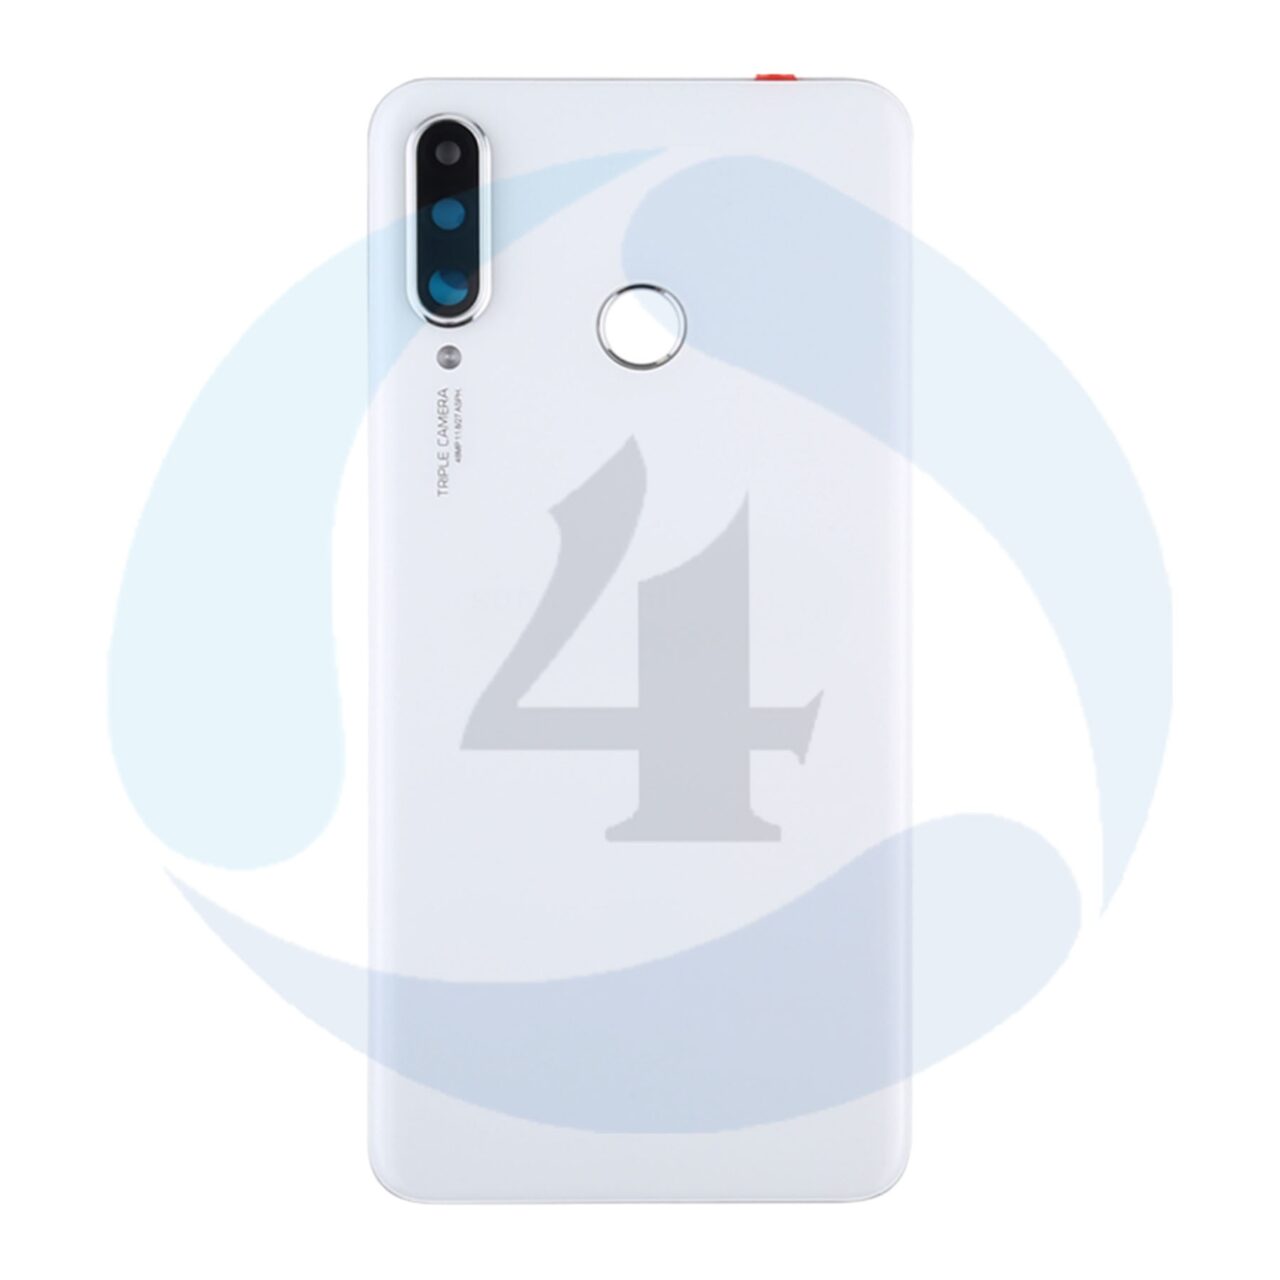 Backcover White For Huawei p30 Lite